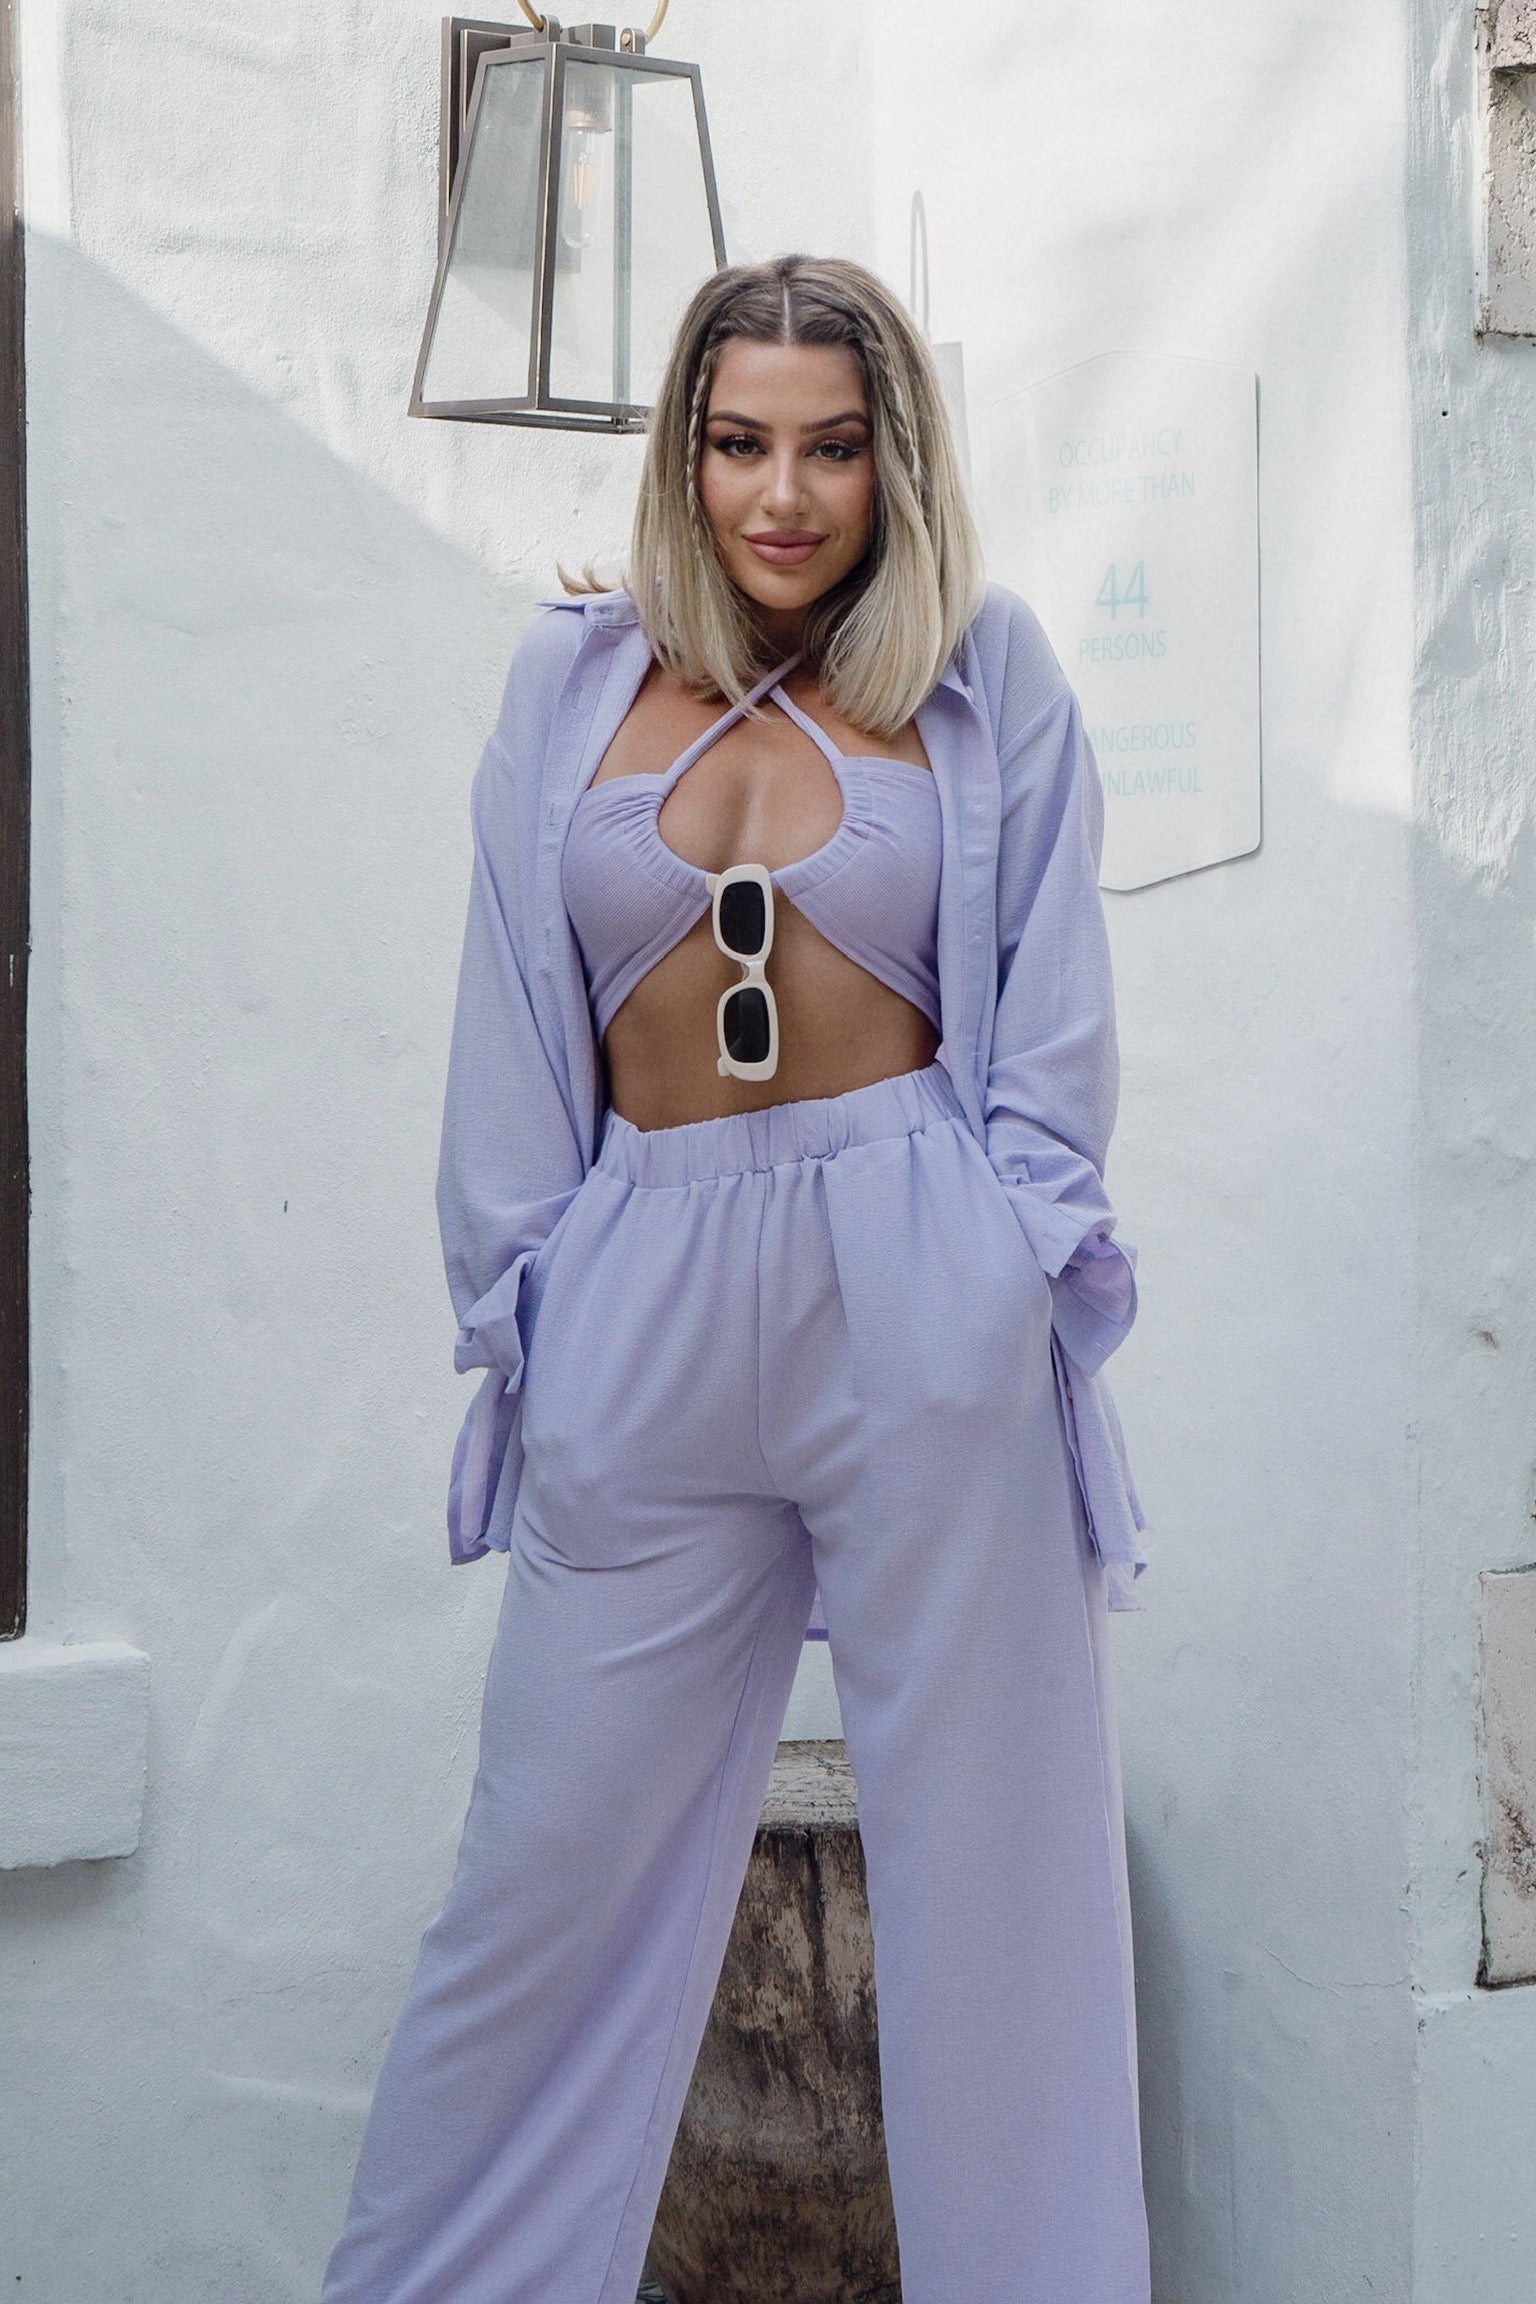 'Montauk' 3 Piece Button Down and Halter Pant Set in Lilac. Scarlette The Label, an online fashion boutique for women.